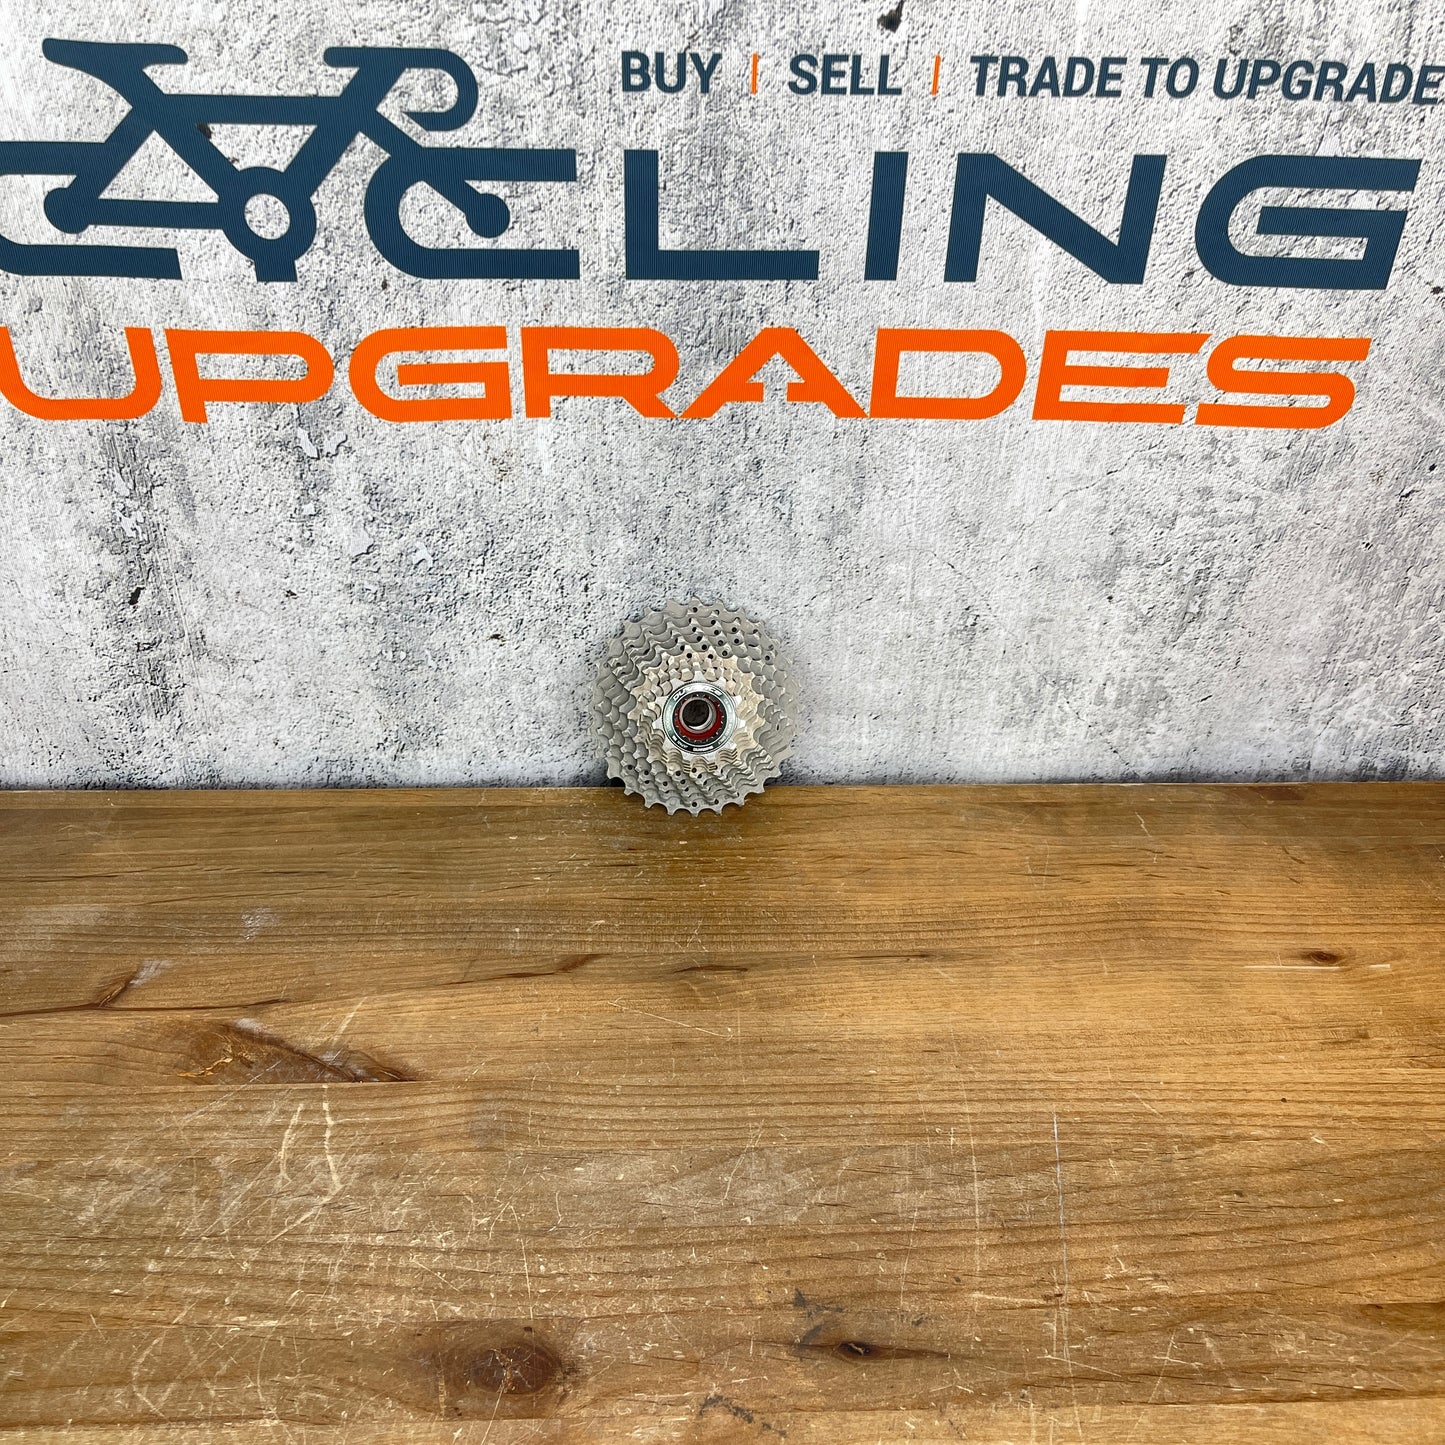 Shimano Dura-Ace CS-R9100 11-28t Cassette "Typical wear" Condition 11-Speed